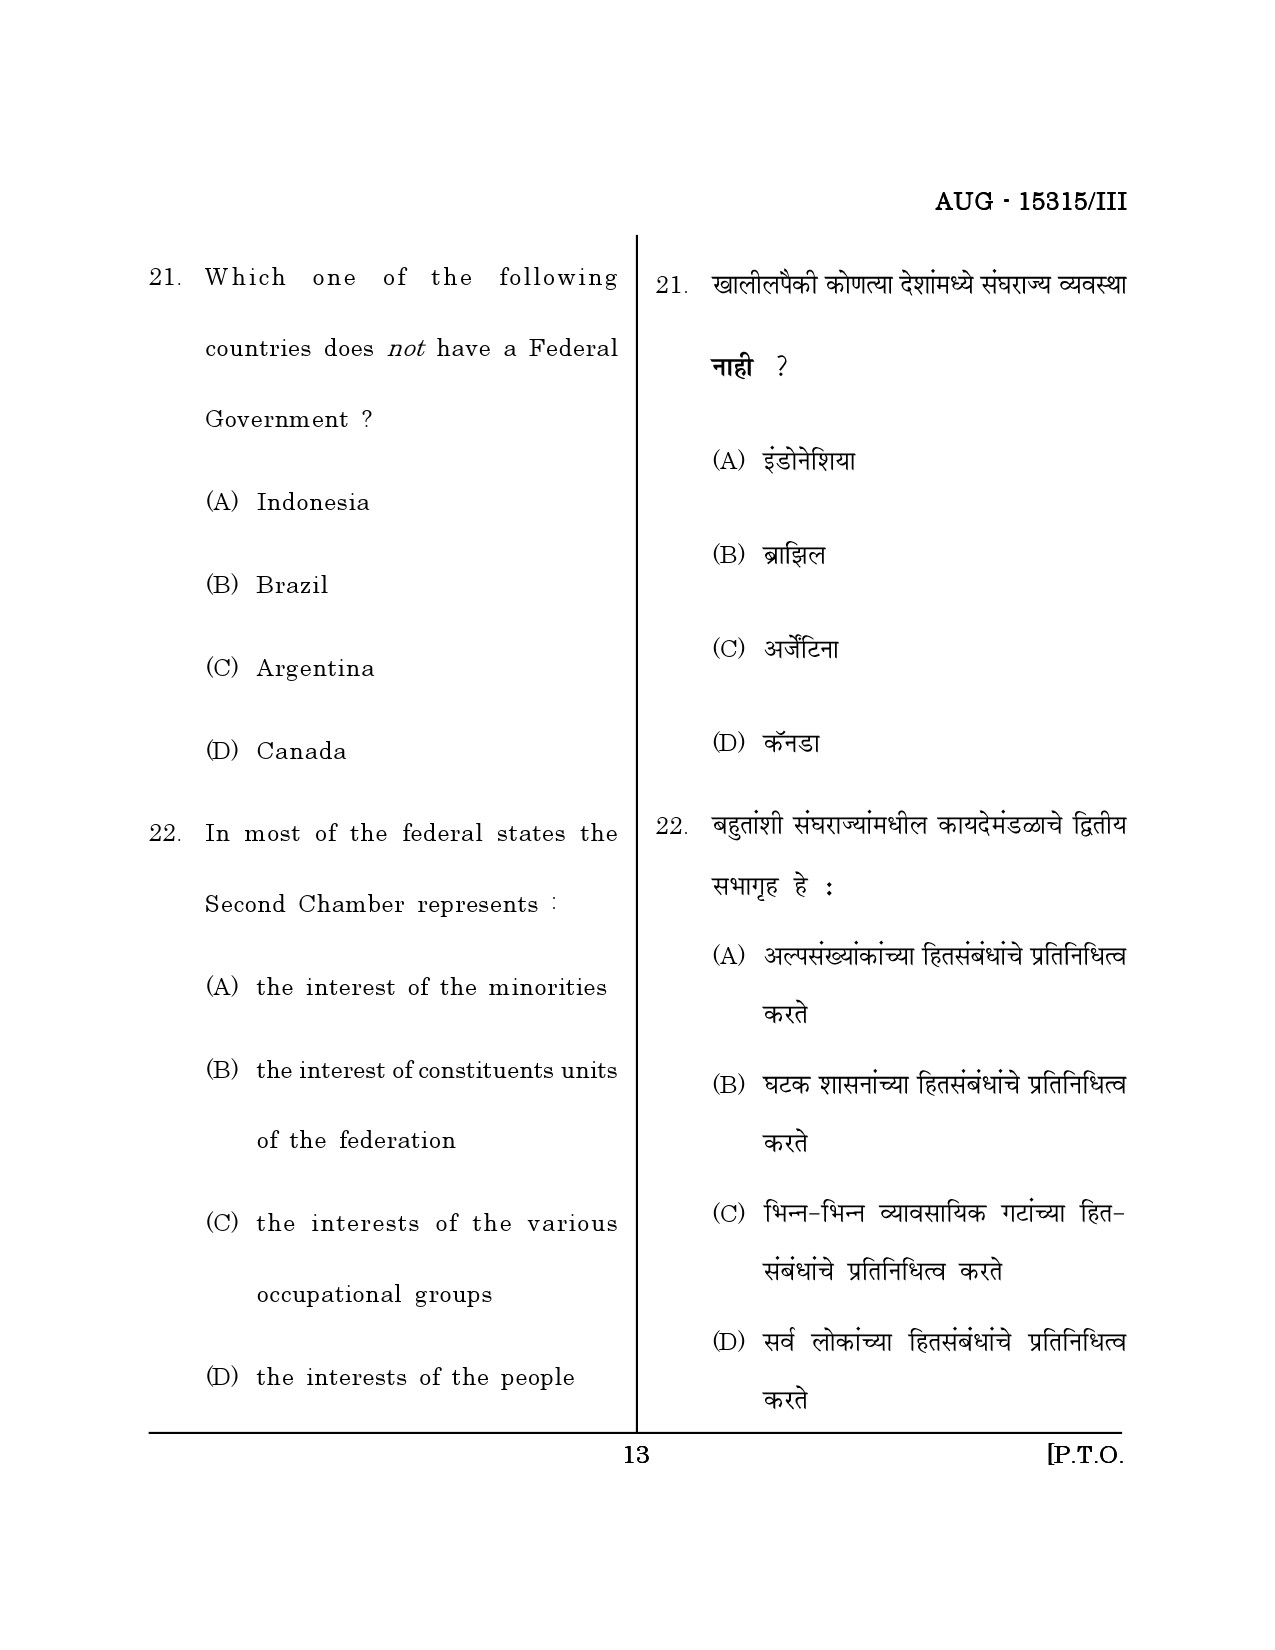 Maharashtra SET Political Science Question Paper III August 2015 12